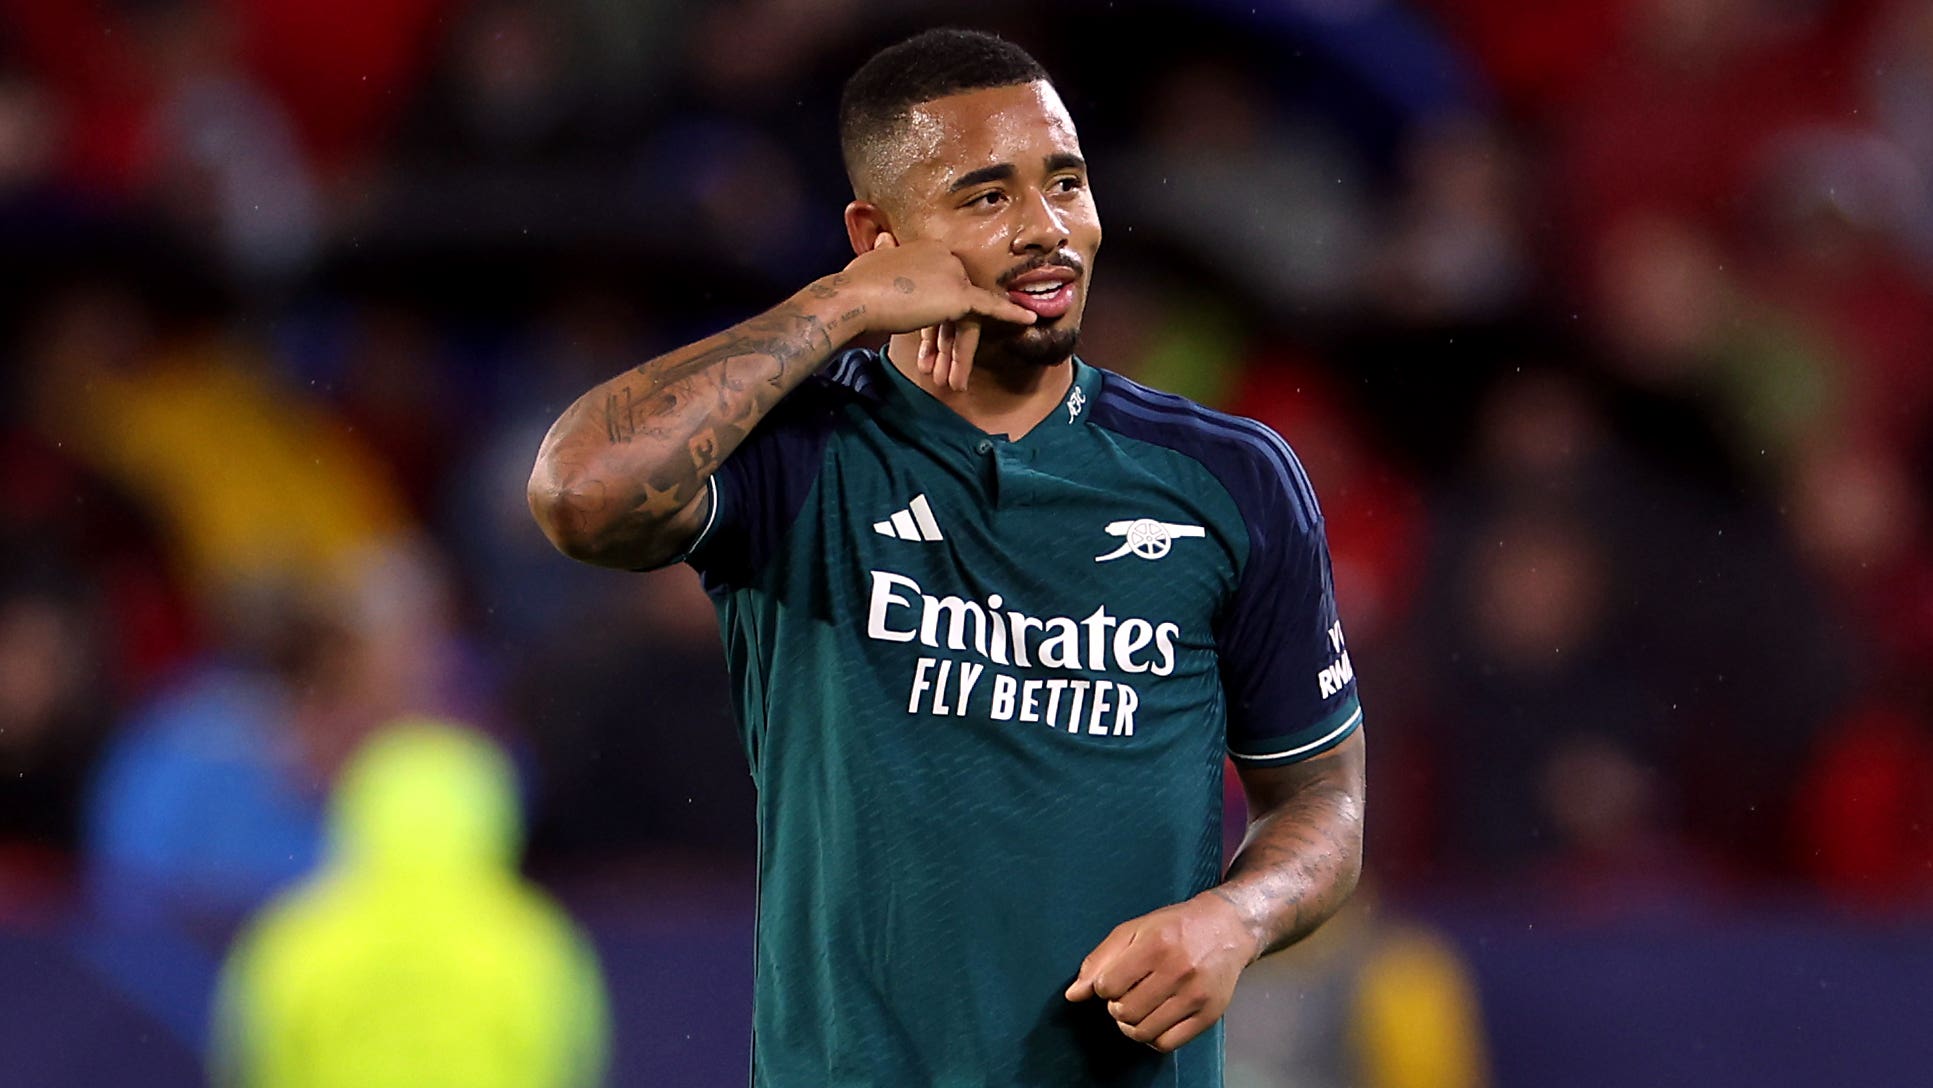 Gabriel Jesus urges Arsenal team-mates to believe they can win Champions League